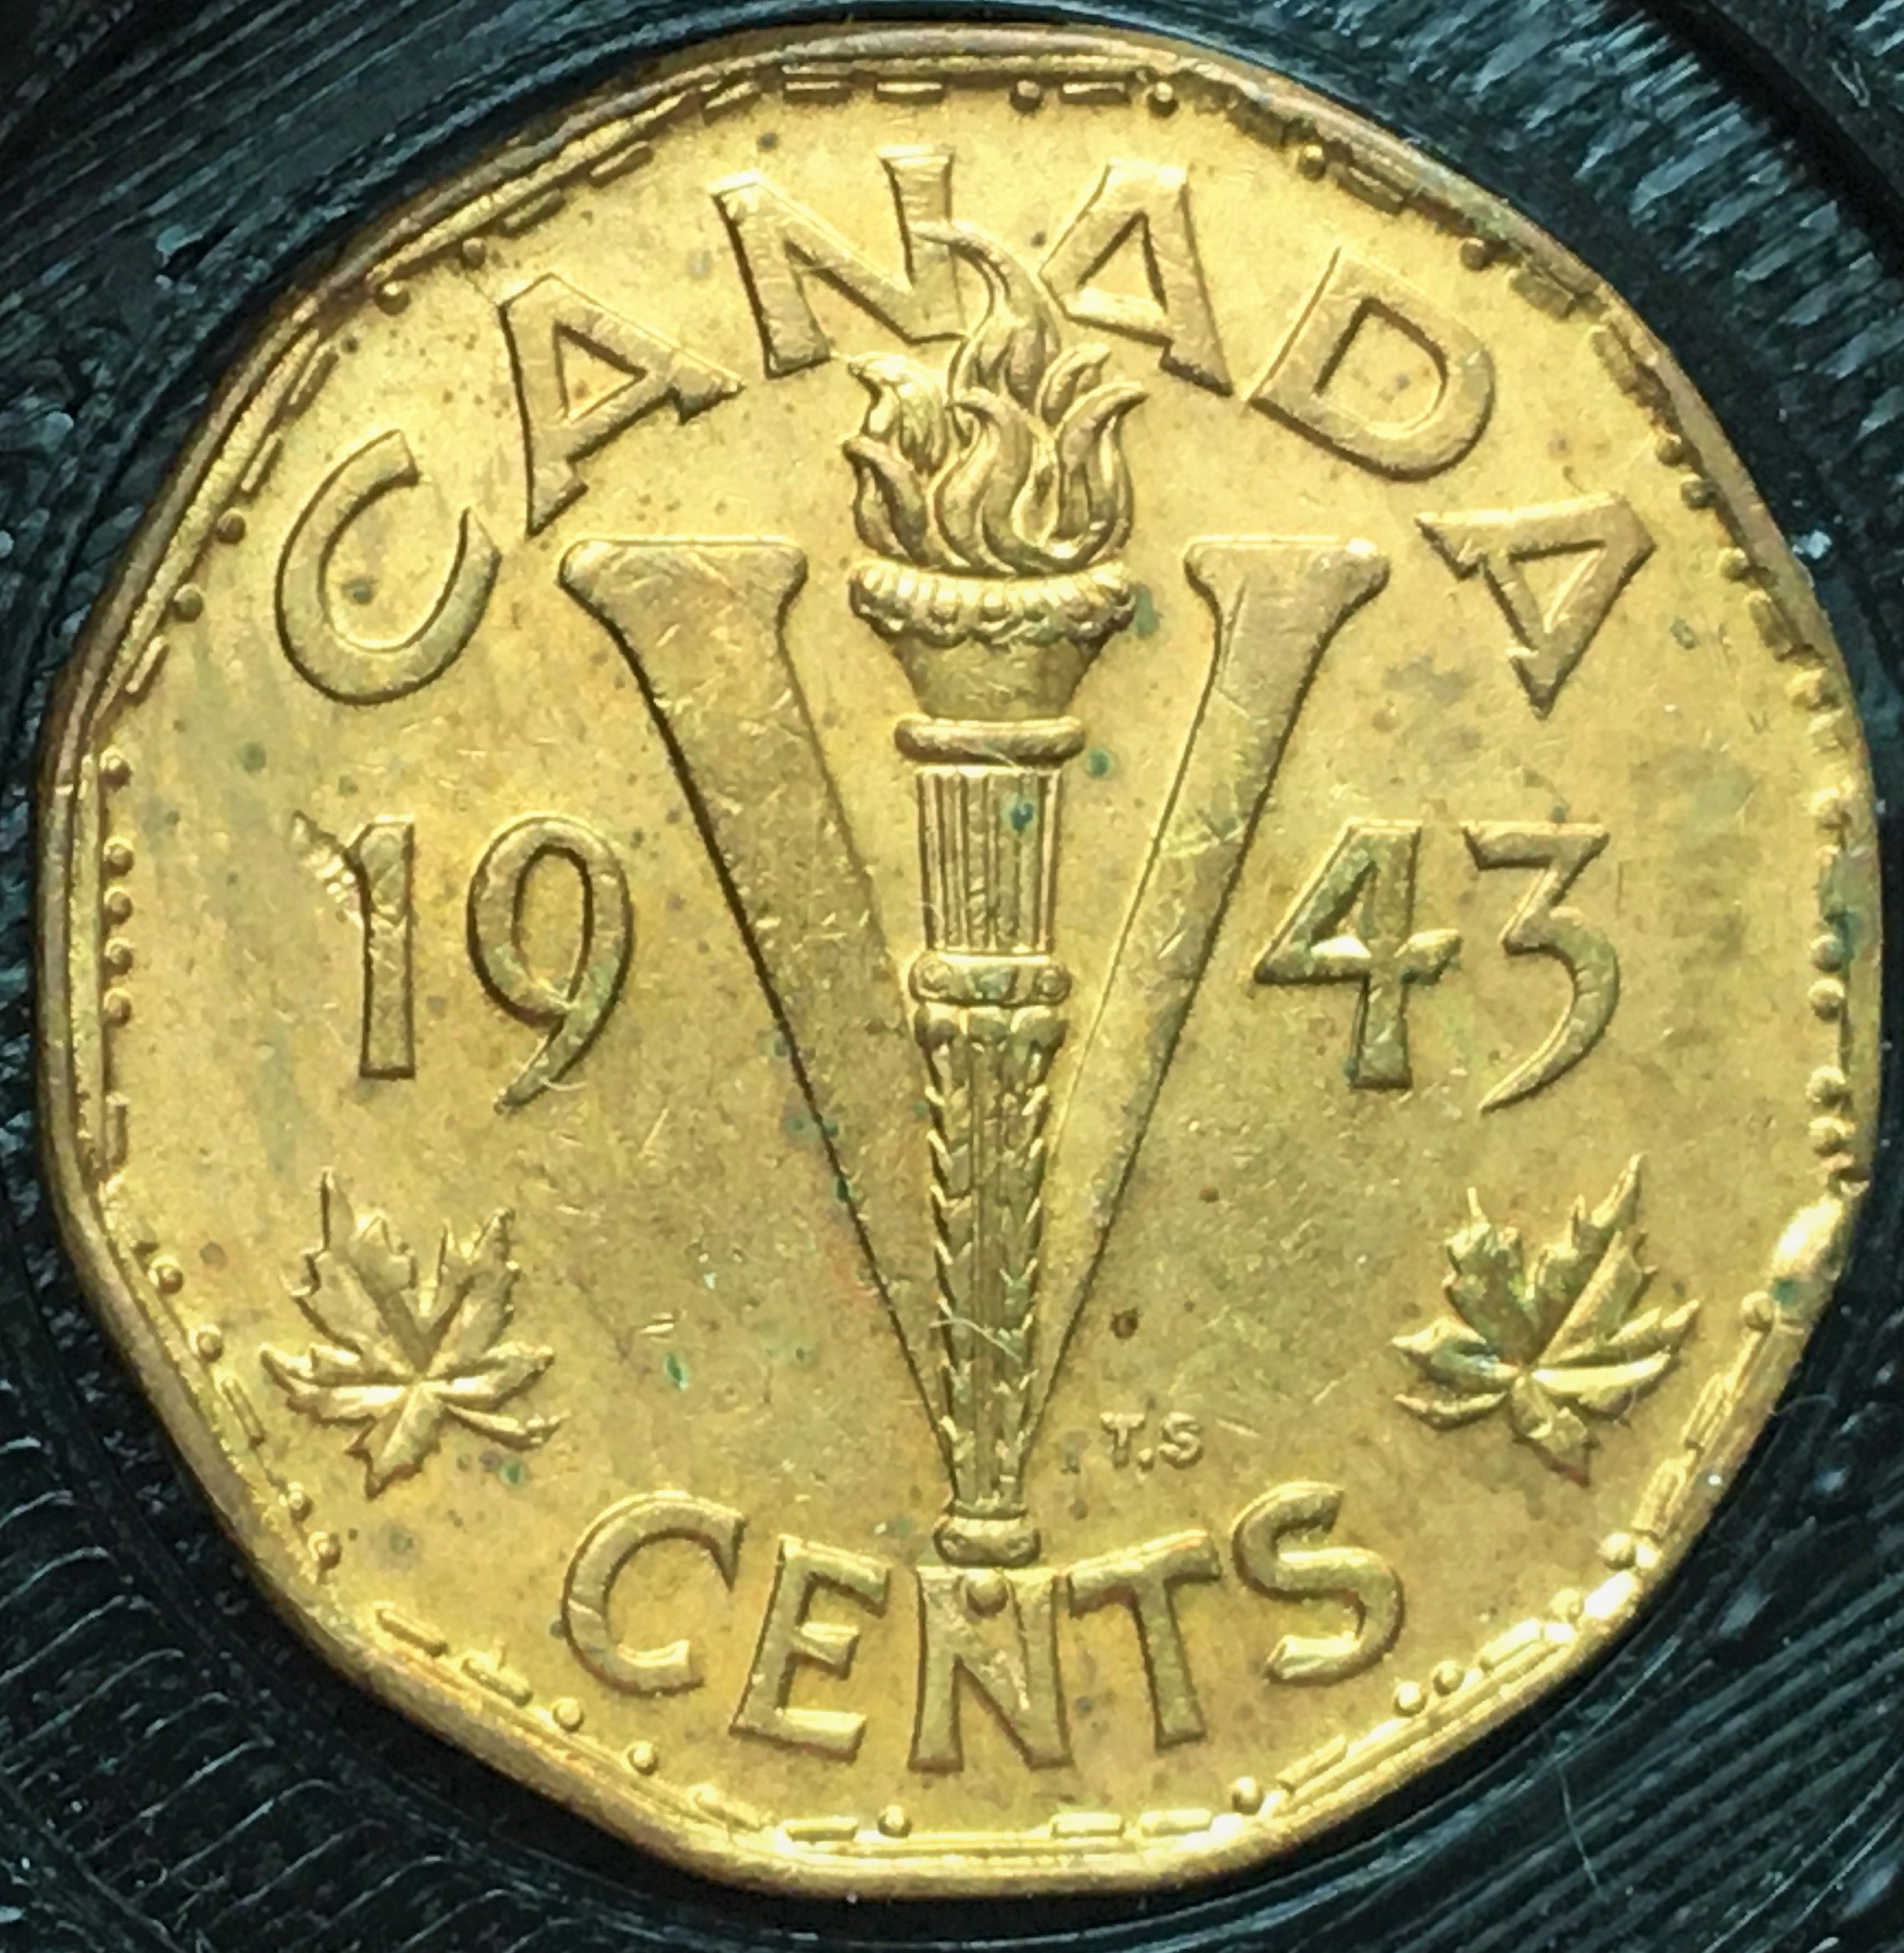 5 cents 1943 gold plated revers.jpg